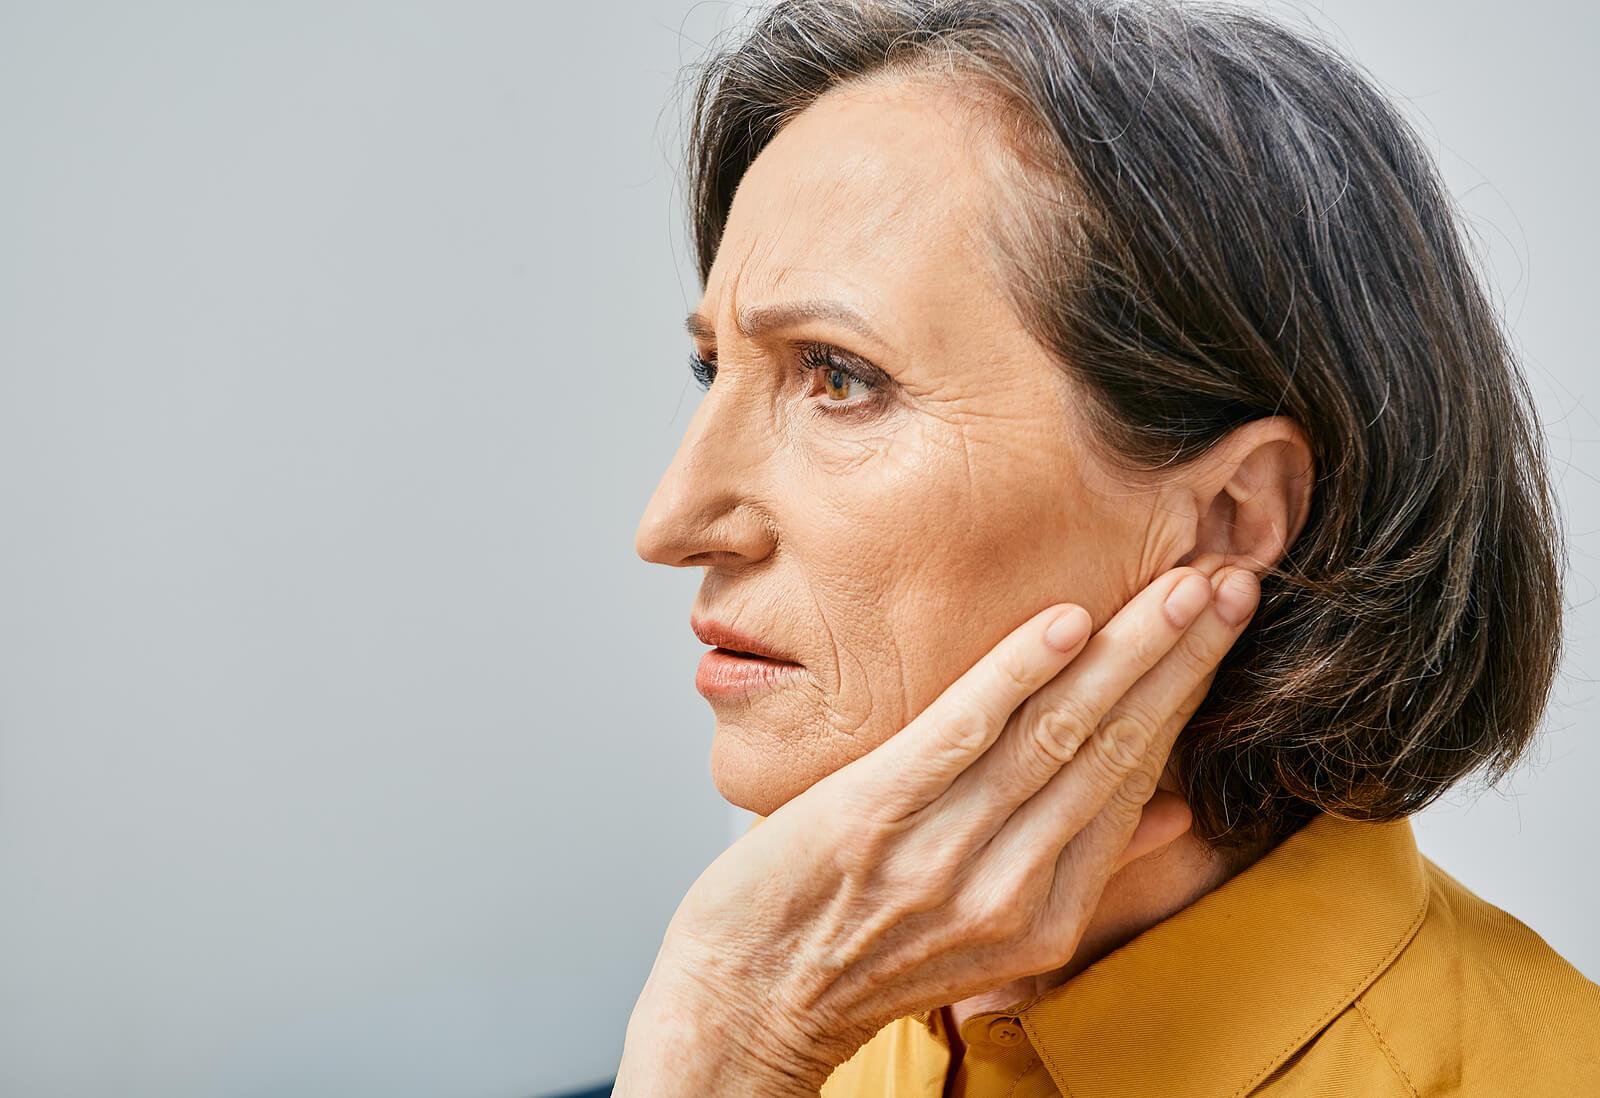 Featured image for “A Link Between Gout and Hearing Loss”